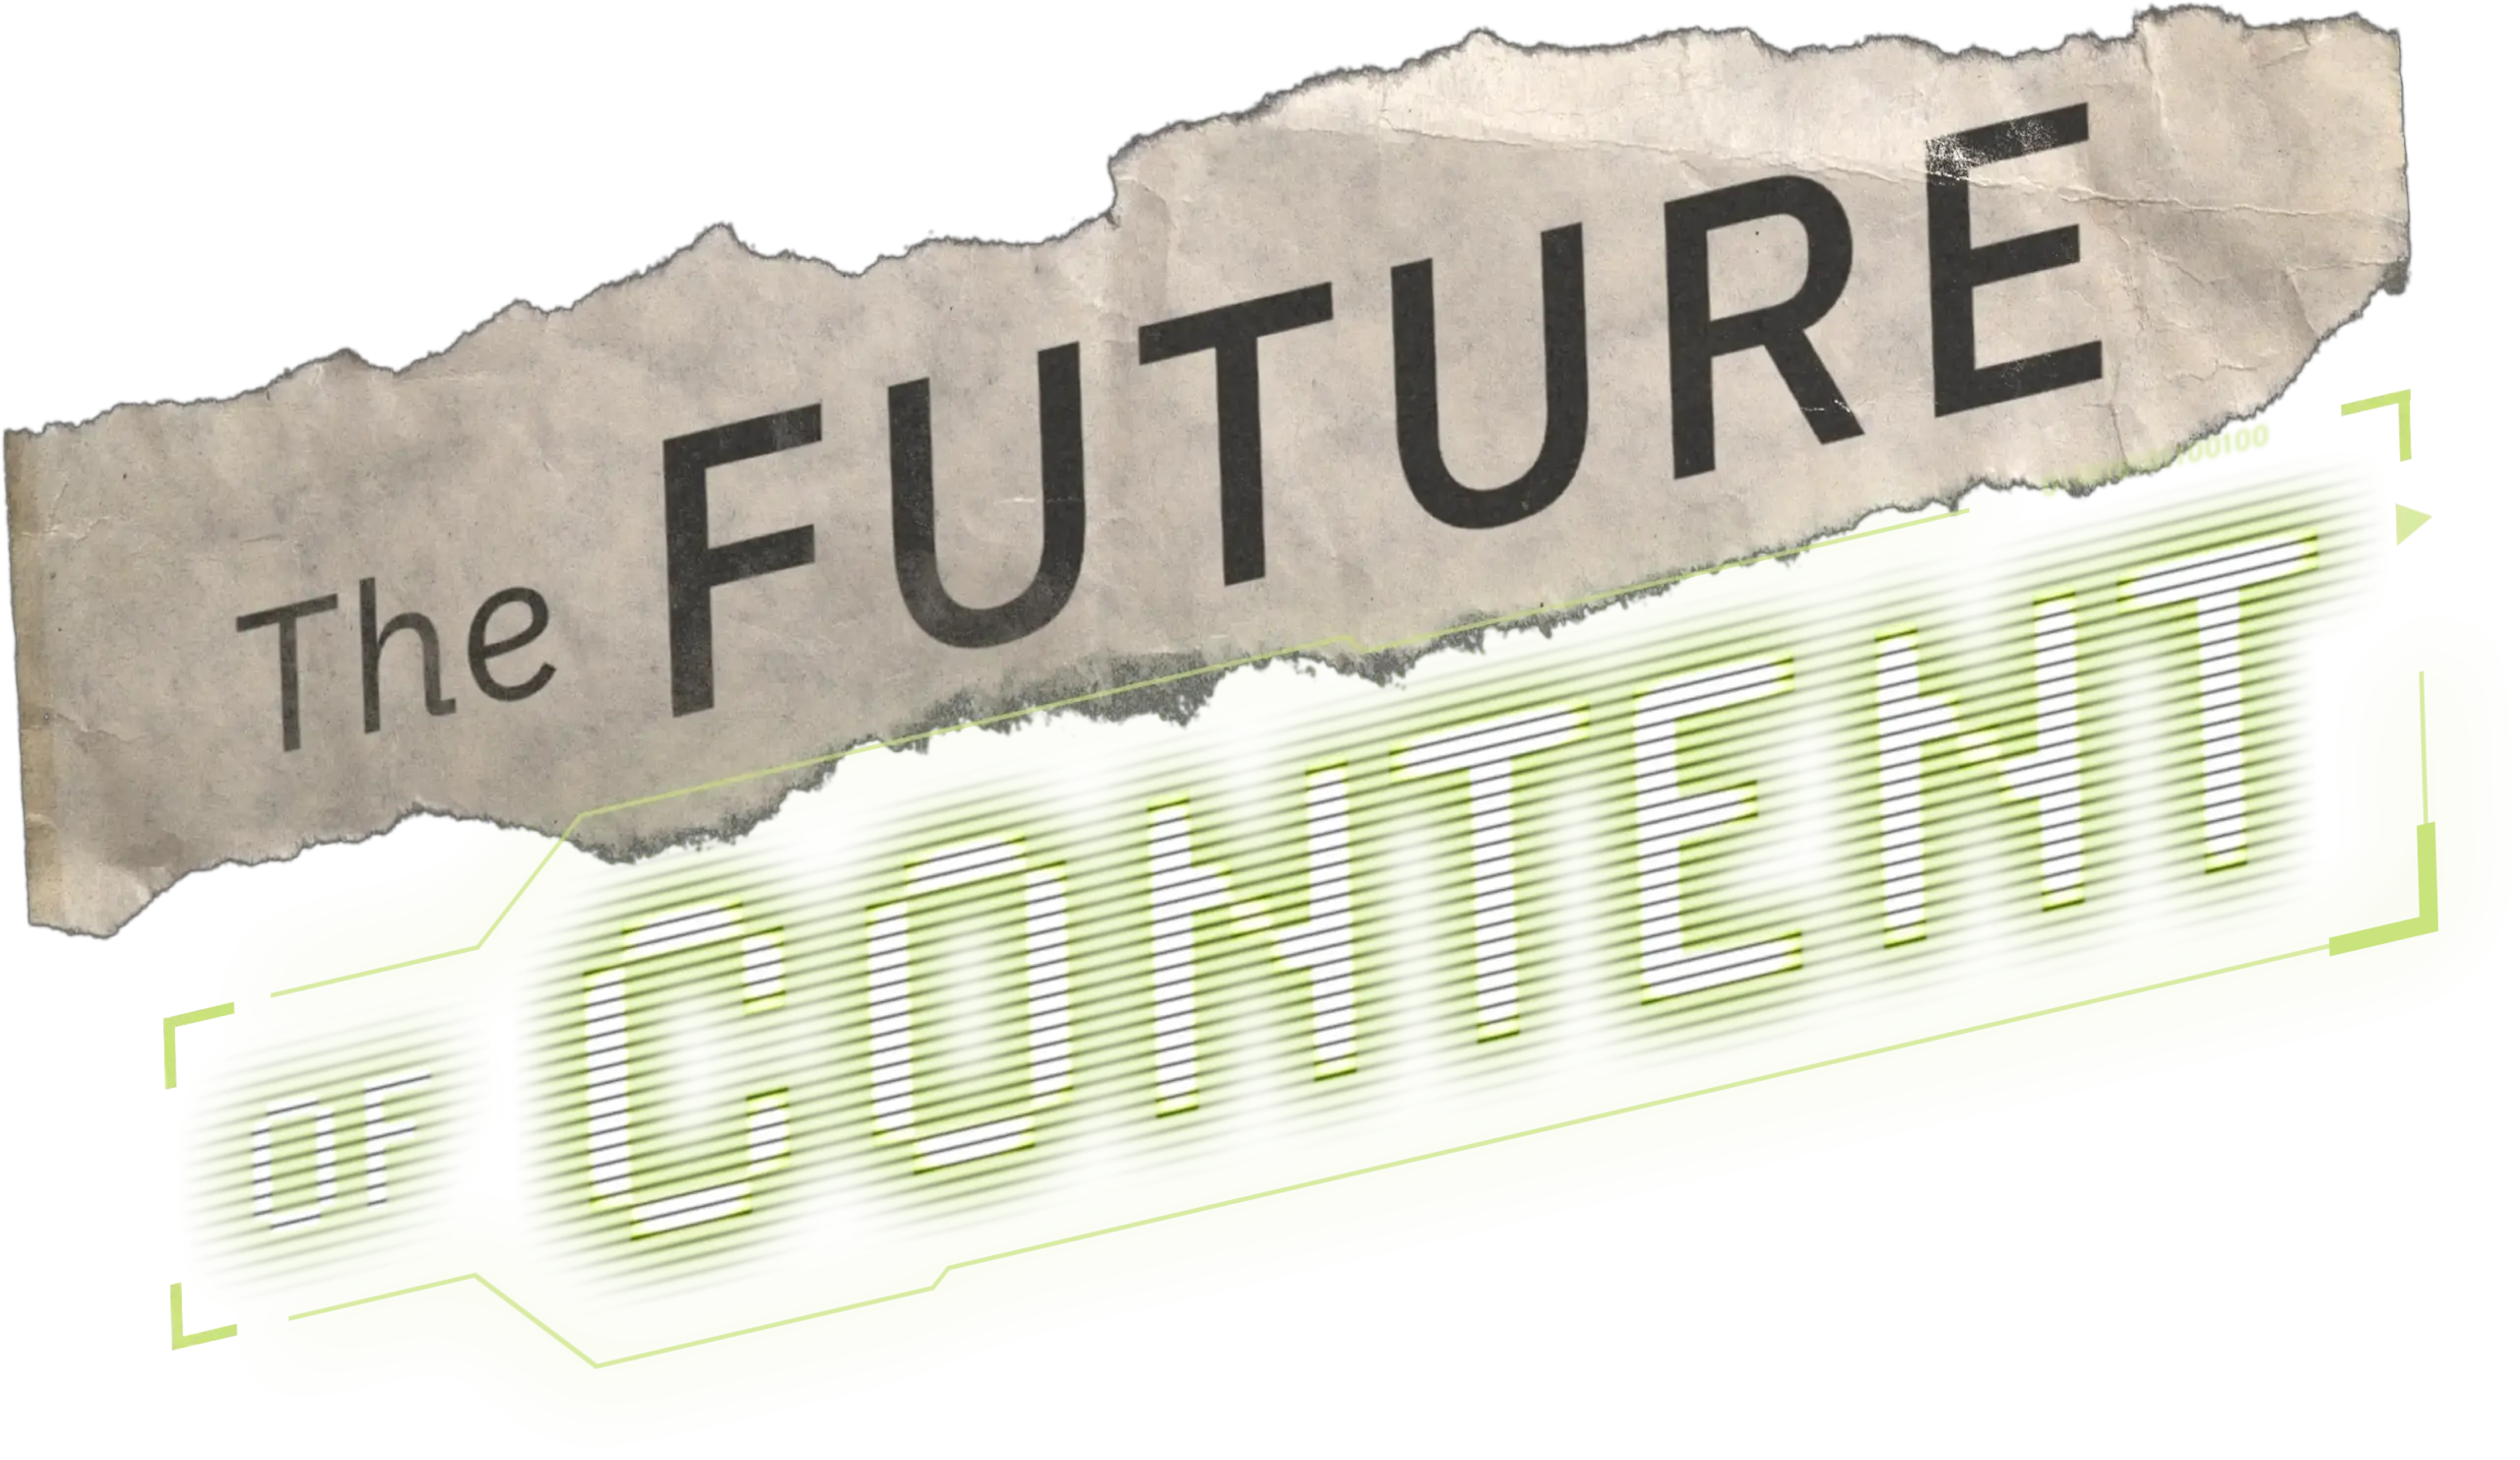 The Future of Content podcast